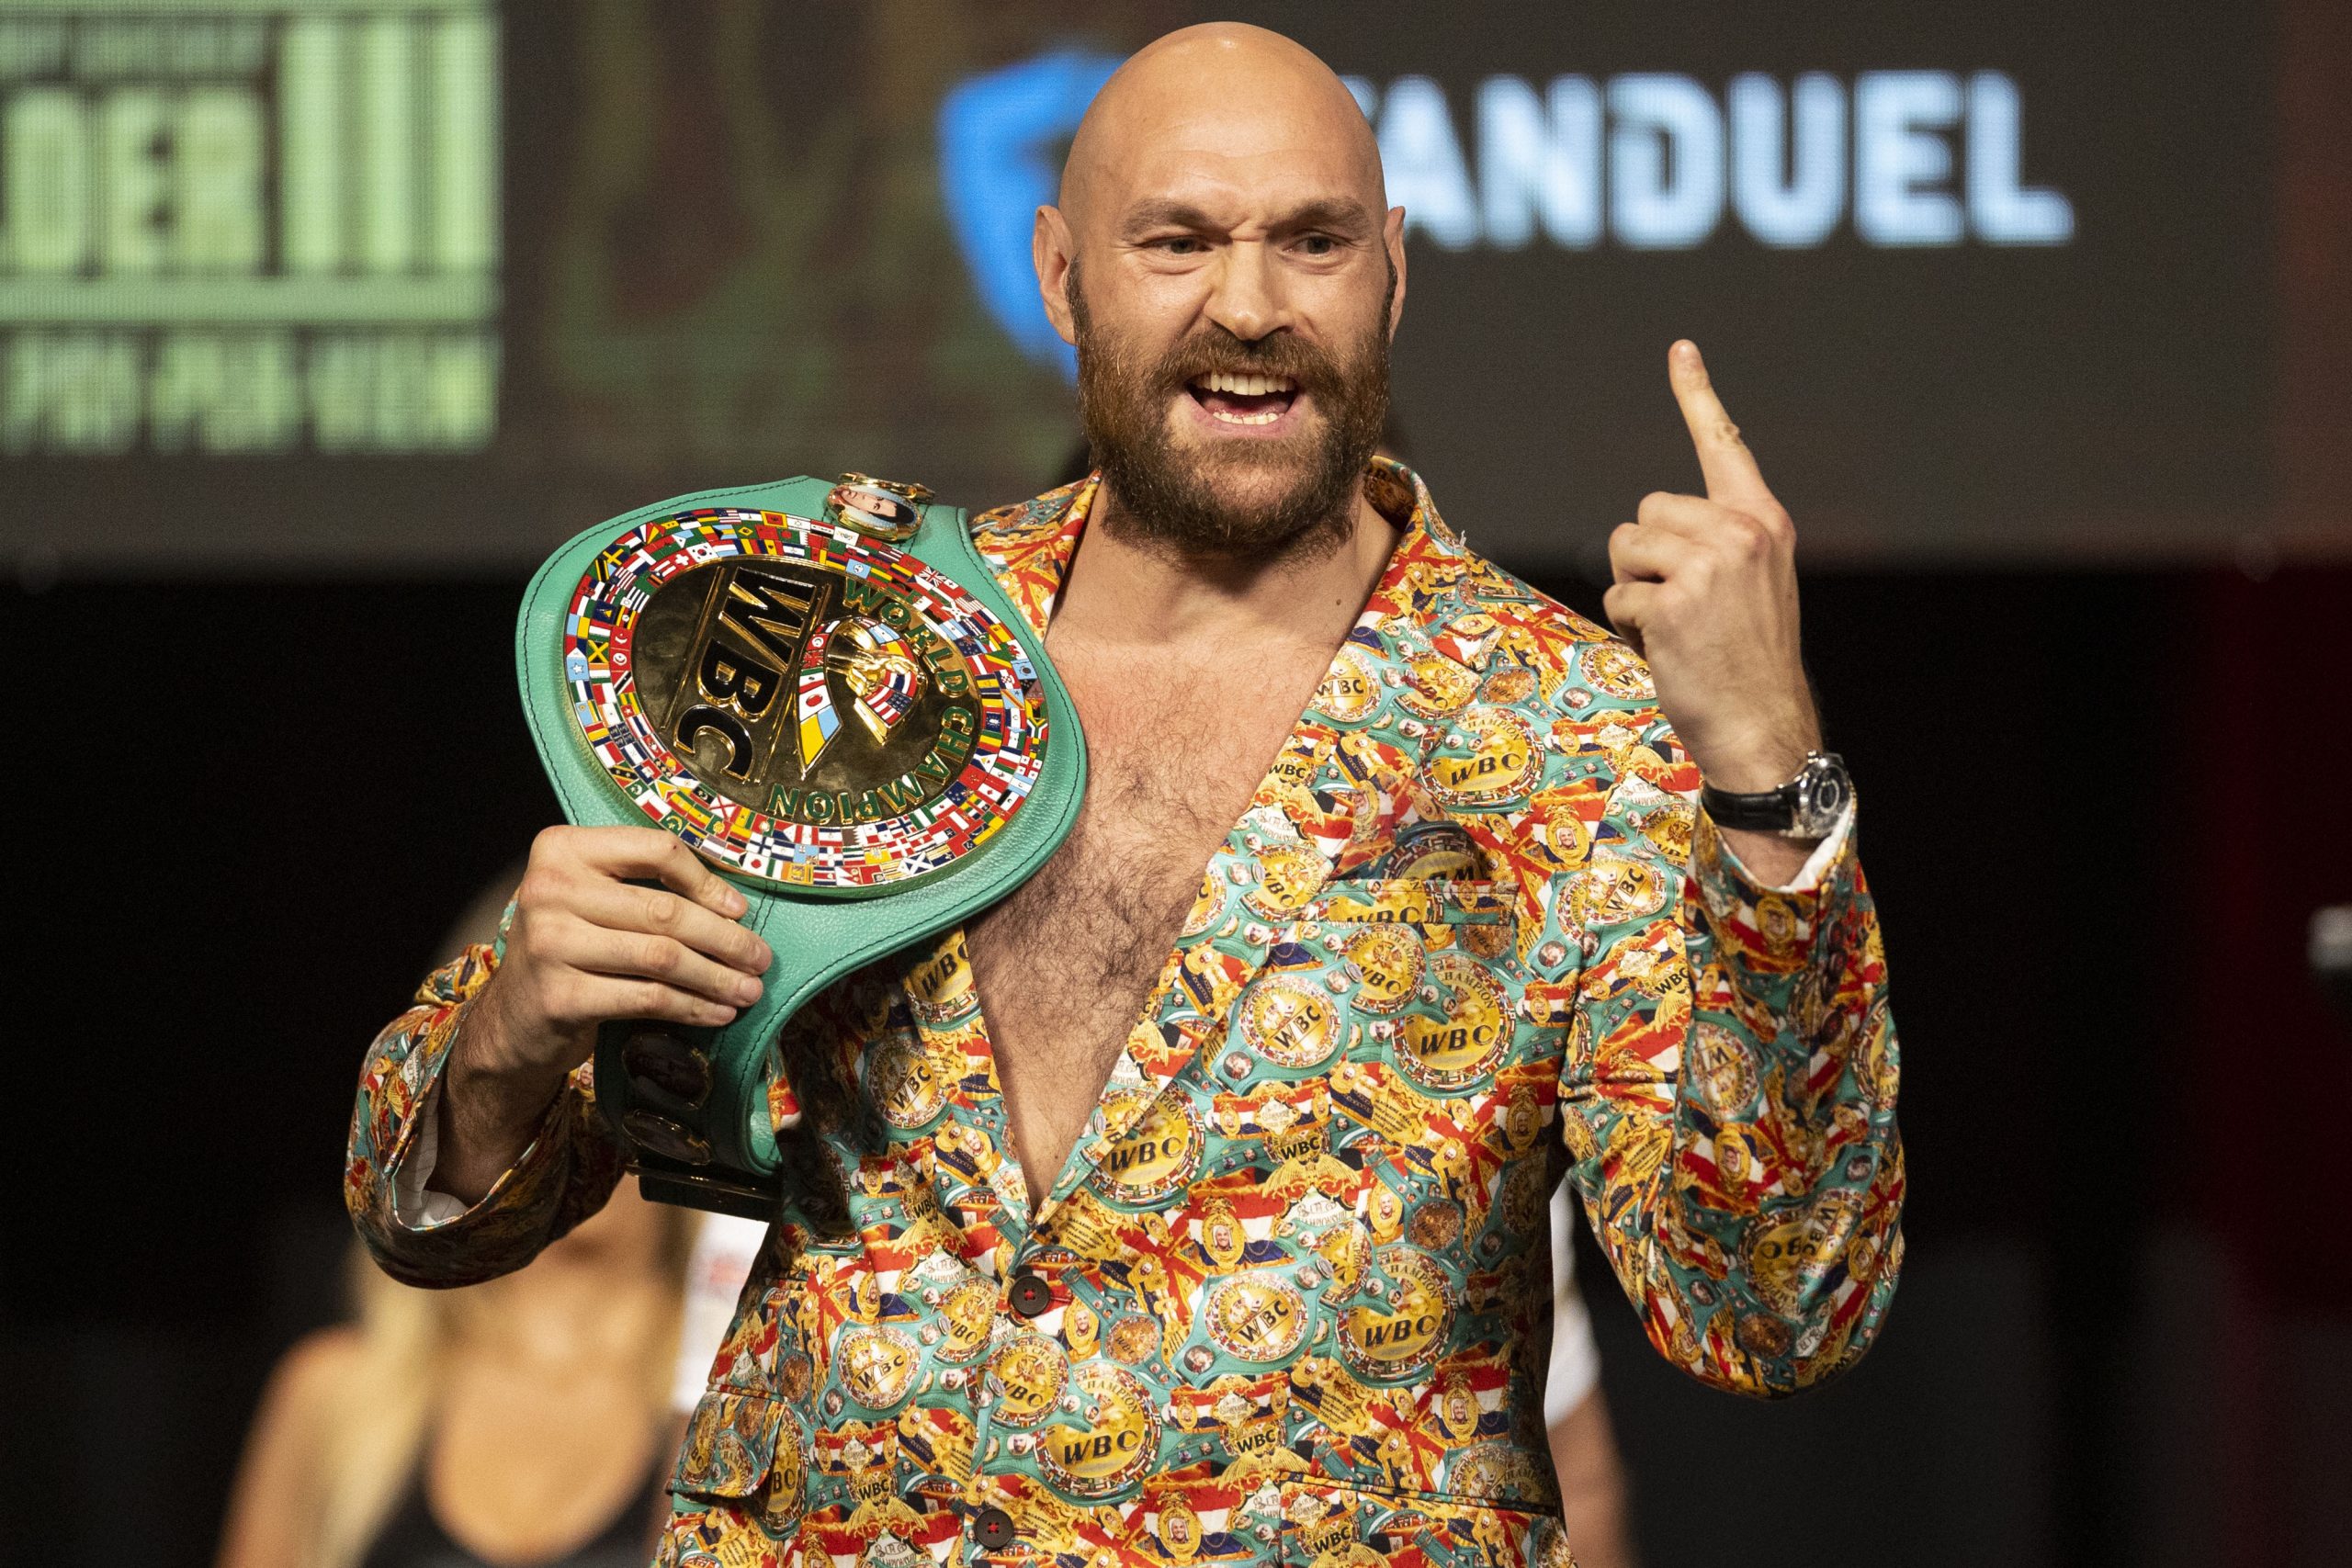 He is second best: Tyson Fury on Deontay Wilder after retaining WBC title